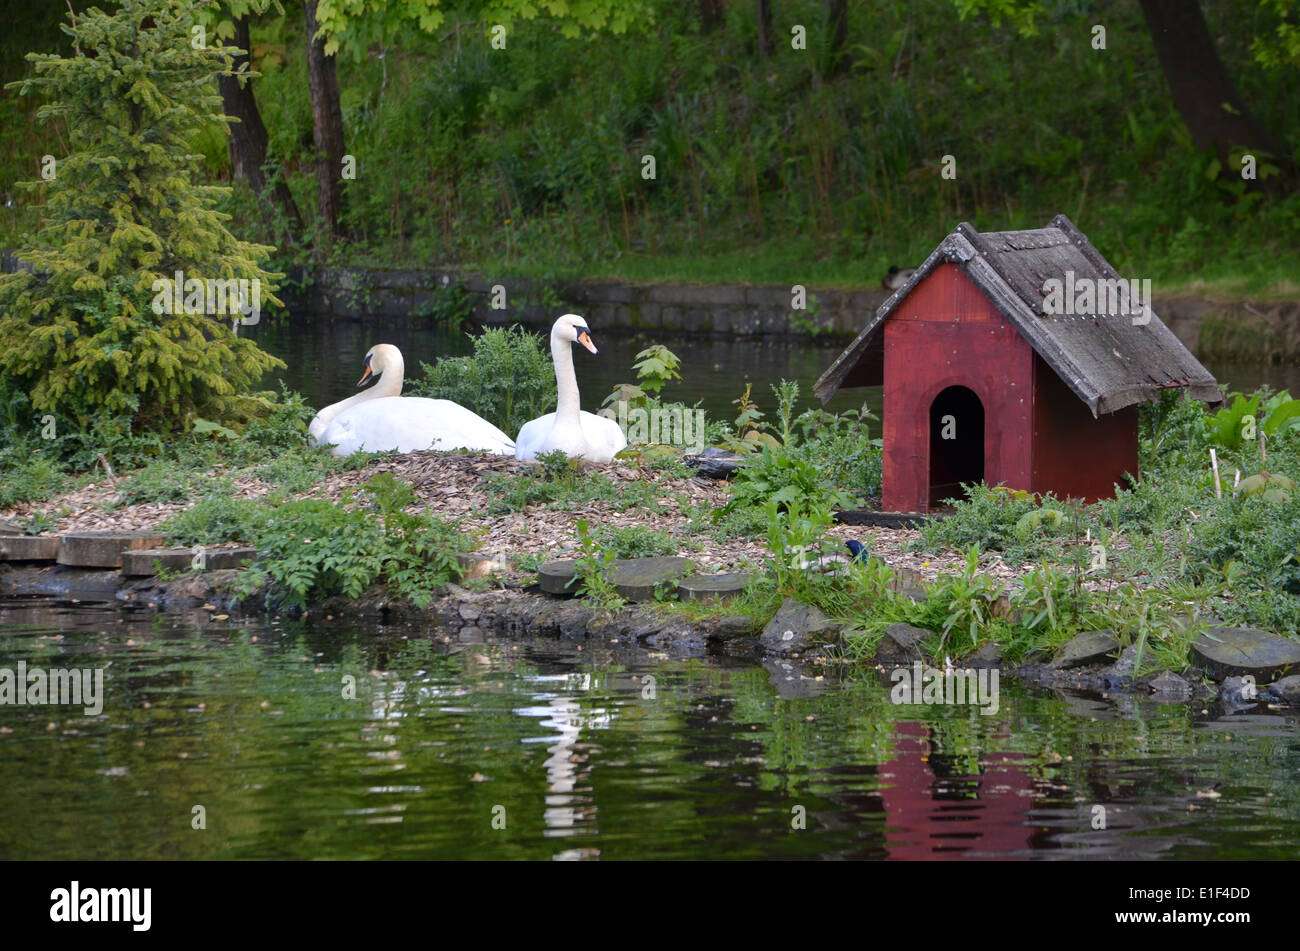 Swans nesting on the island on the duck pond in the Dalmuir Park Stock Photo